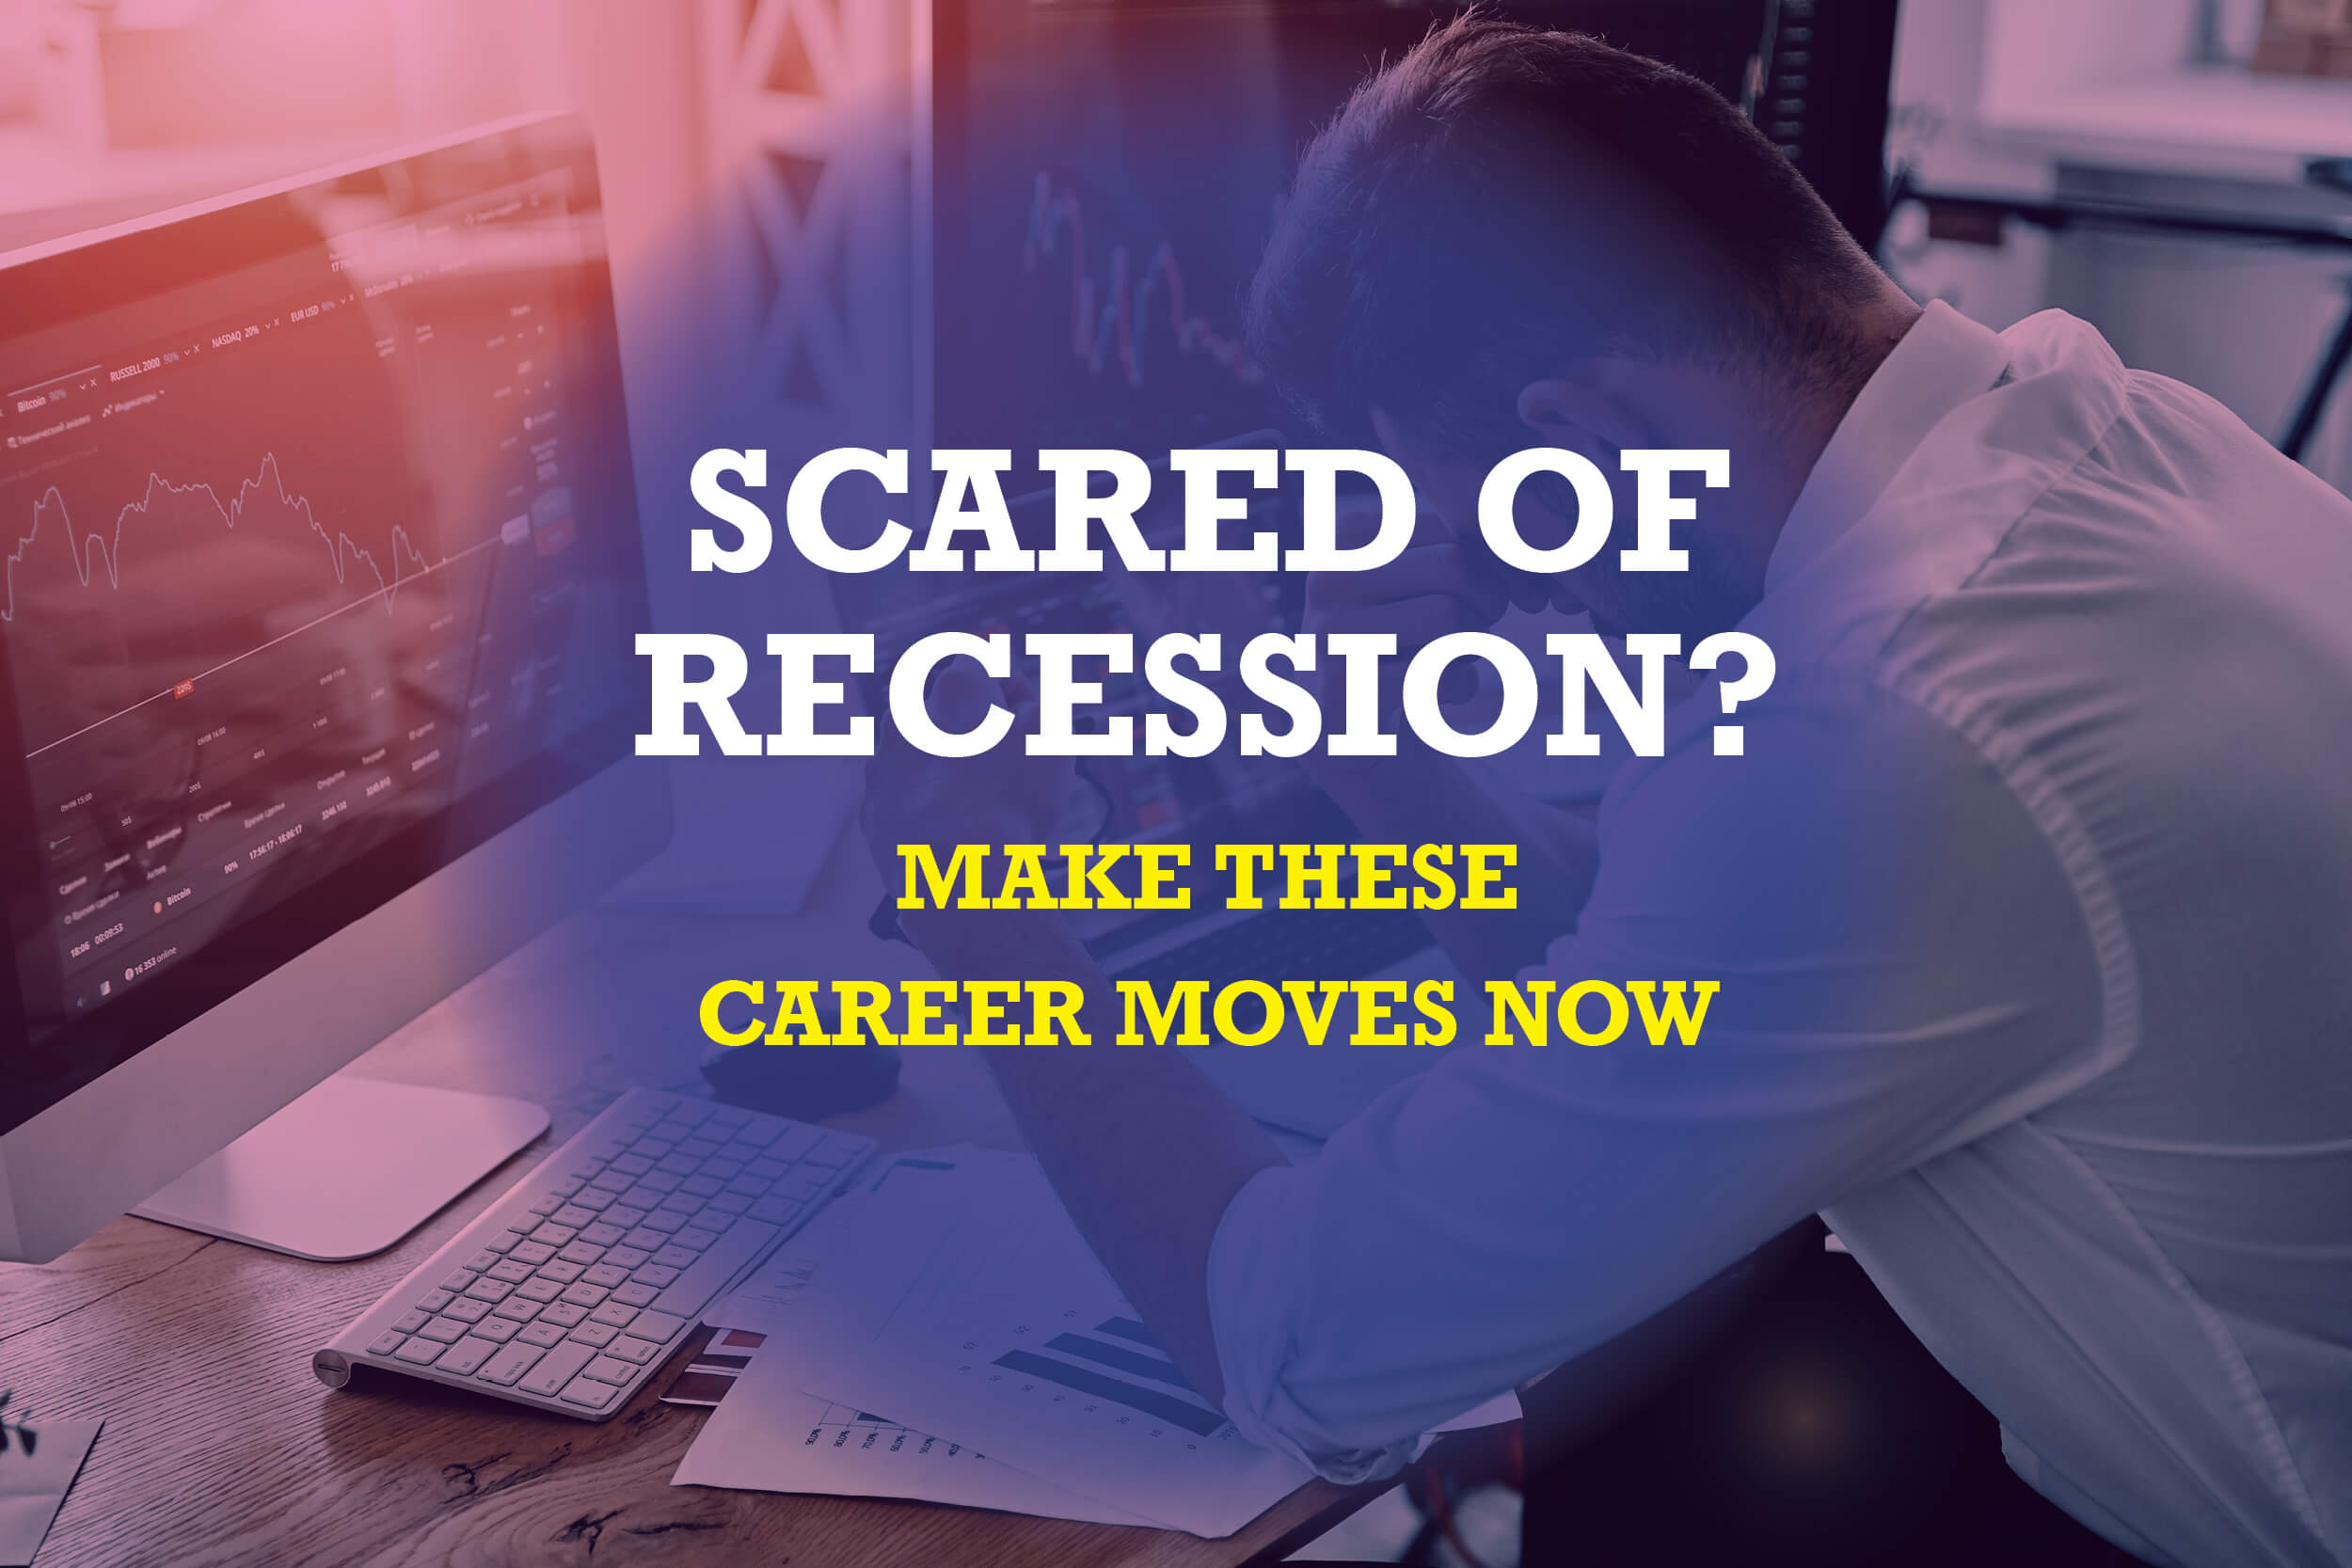 Scared of Recession? Make These Career Moves Now